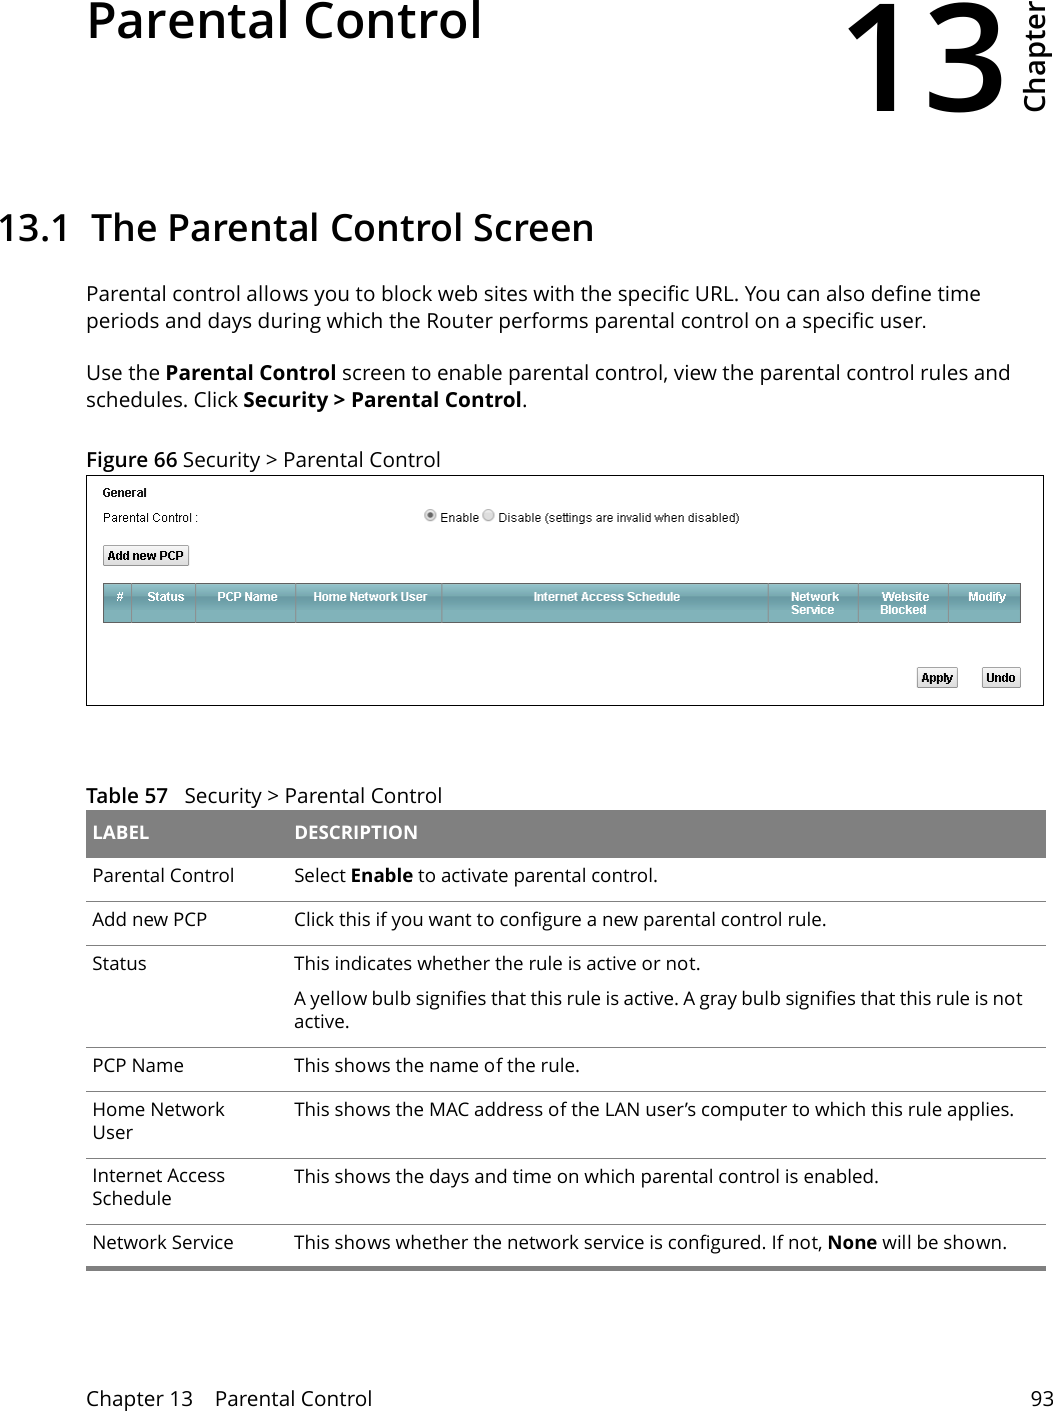 13Chapter Chapter 13    Parental Control 93CHAPTER 13 Chapter 13 Parental Control13.1  The Parental Control ScreenParental control allows you to block web sites with the specific URL. You can also define time periods and days during which the Router performs parental control on a specific user. Use the Parental Control screen to enable parental control, view the parental control rules and schedules. Click Security &gt; Parental Control. Figure 66 Security &gt; Parental Control  Table 57   Security &gt; Parental Control LABEL DESCRIPTIONParental Control Select Enable to activate parental control.Add new PCP Click this if you want to configure a new parental control rule.Status This indicates whether the rule is active or not.A yellow bulb signifies that this rule is active. A gray bulb signifies that this rule is not active.PCP Name This shows the name of the rule.Home Network User This shows the MAC address of the LAN user’s computer to which this rule applies.Internet Access ScheduleThis shows the days and time on which parental control is enabled.Network Service This shows whether the network service is configured. If not, None will be shown.